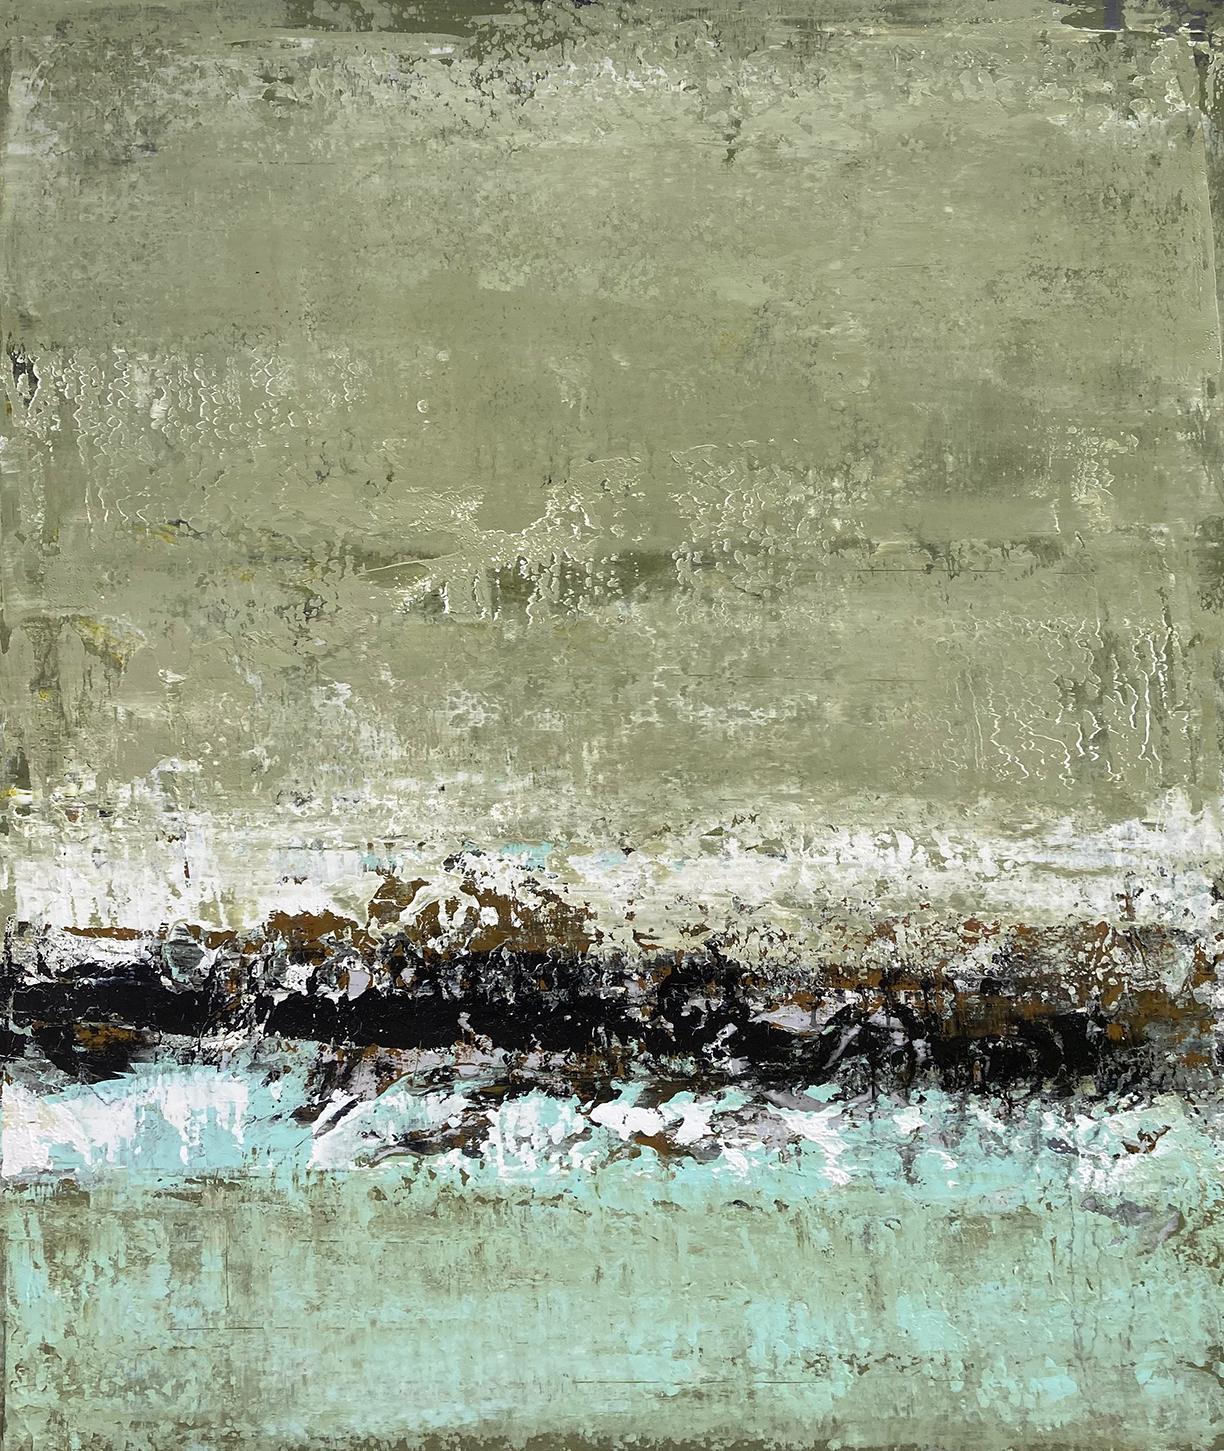 Untitled, no 7 -Green Contemporary Large Textured Abstract Landscape Painting